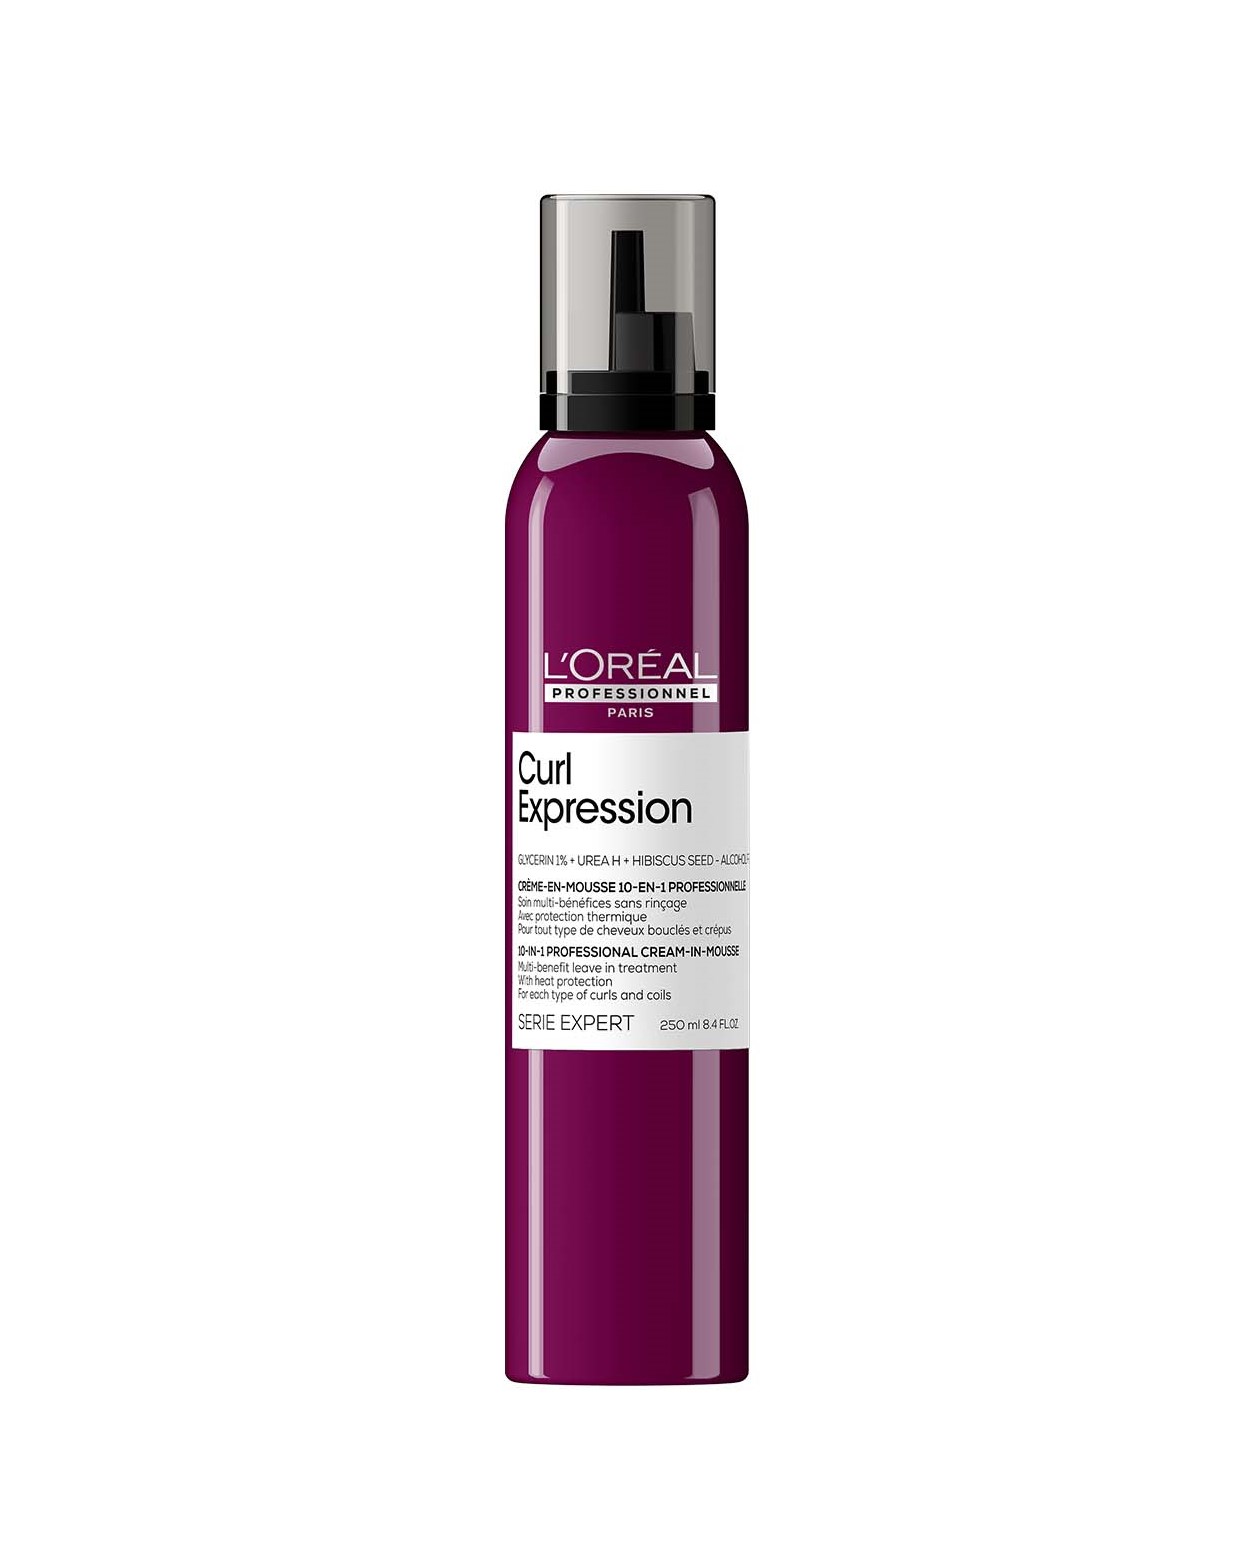 L'Oreal Professionnel Curl Expression 10in1 Cream-in-Mousse 250ml